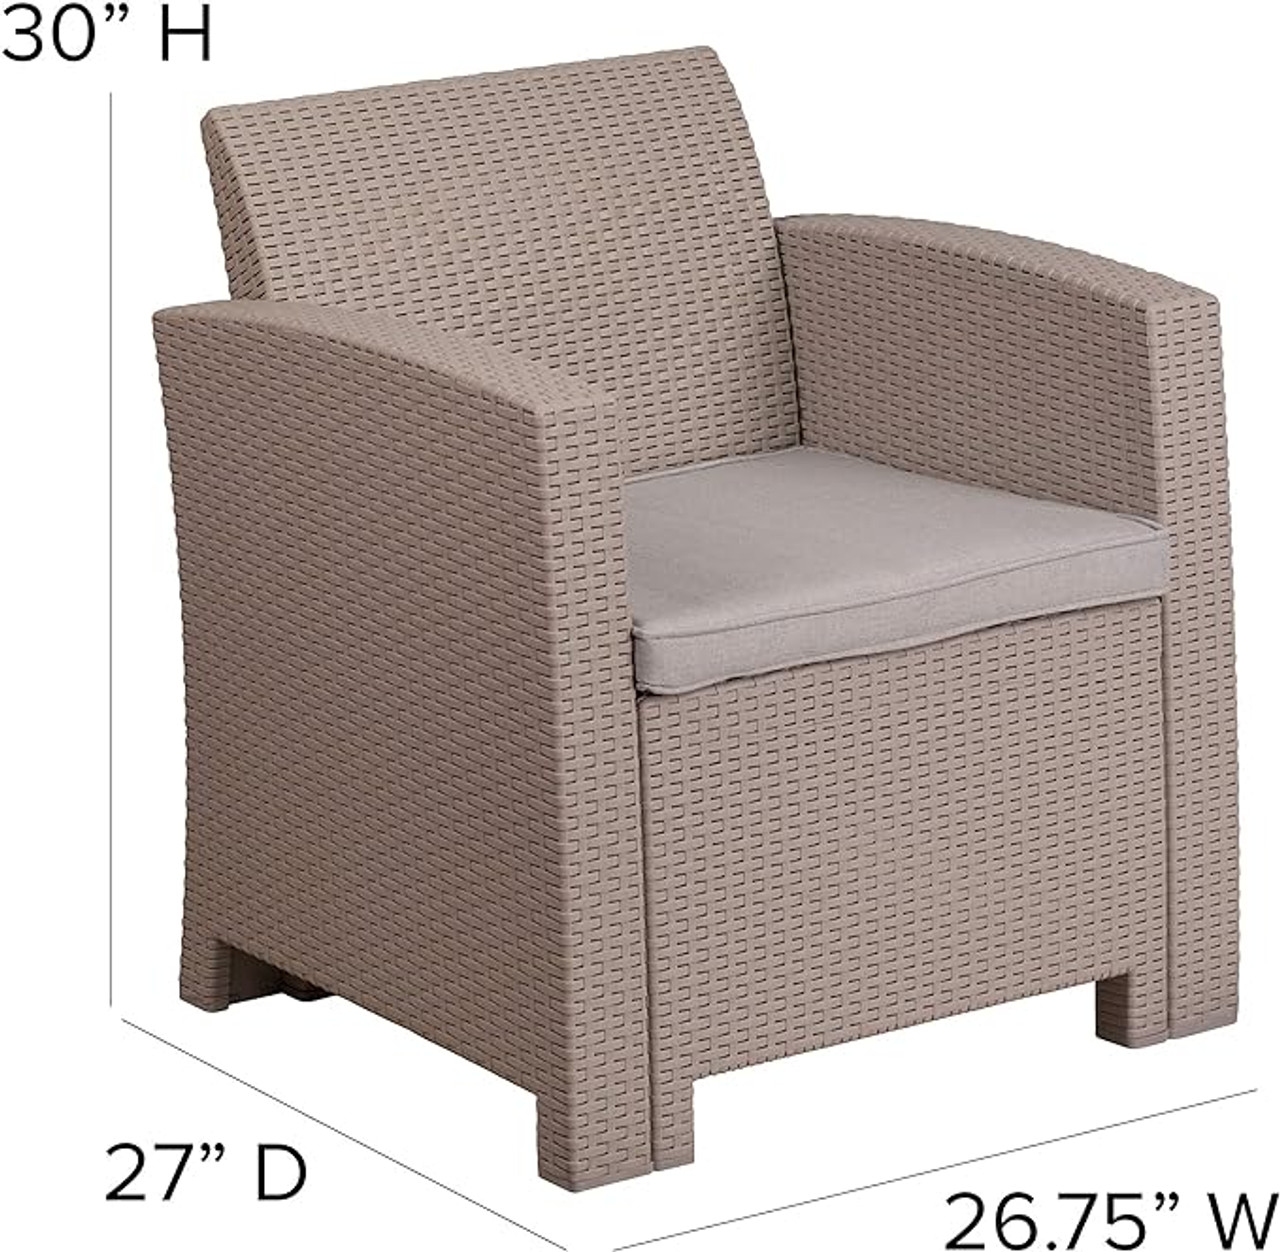 Flash Furniture 30"H, 26 3/4"W Resin, Charcoal DAD-SF2-1-GG Outdoor Chair w/ Seat Cushion - Chicken Pieces